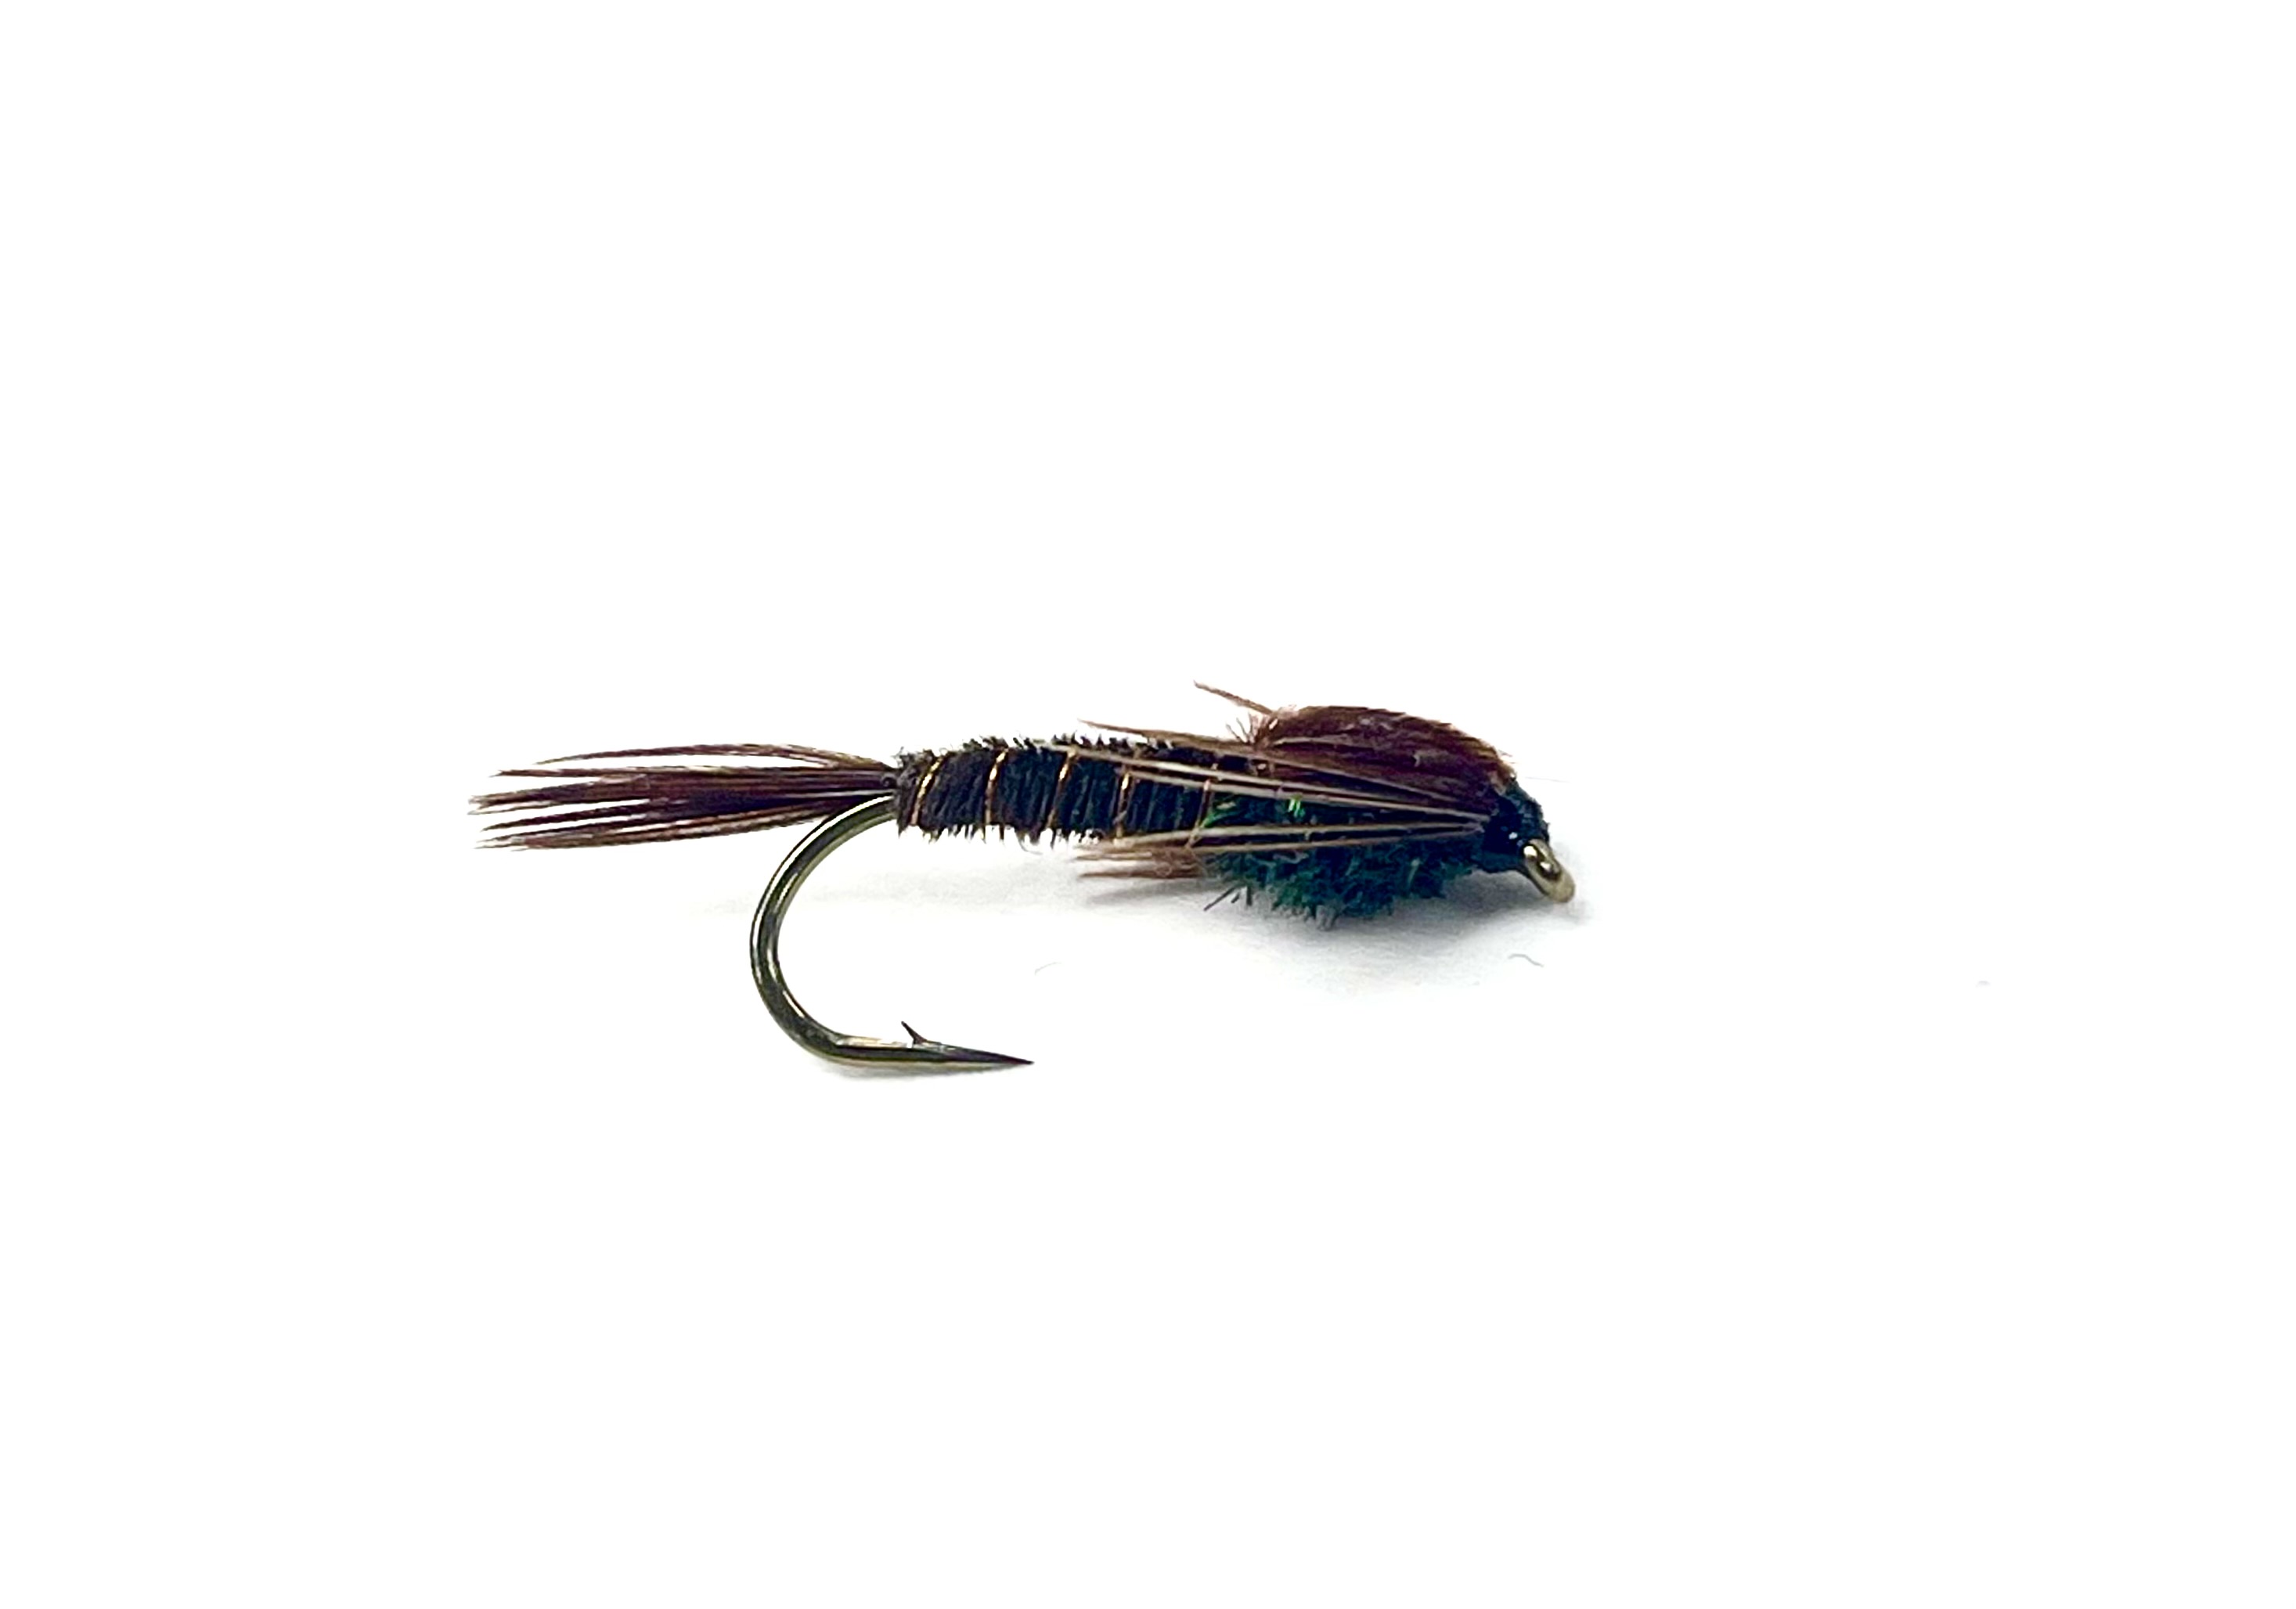 FAD Pheasant Tail Nymph - Natural - Size 16